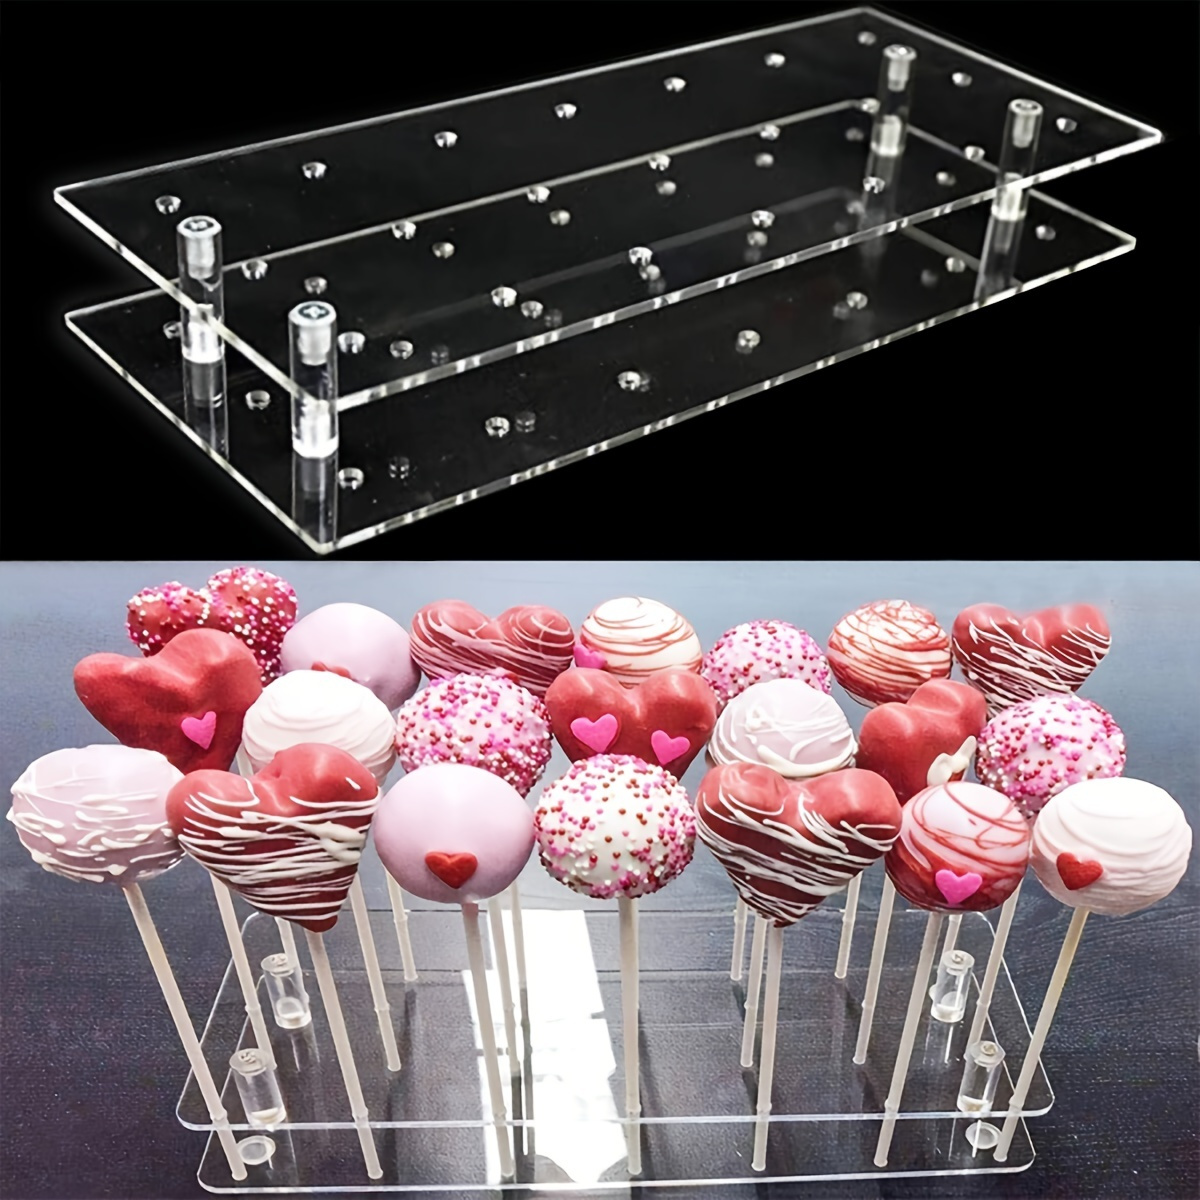 

1pc, Acrylic Lollipop Stand 21 Holes Acrylic Pop Holder Transparent Lollipop Display Detachable Cake Lollipop Stand Holder For Wedding Baby Shower Birthday Party Halloween Christmas Candy Decoration